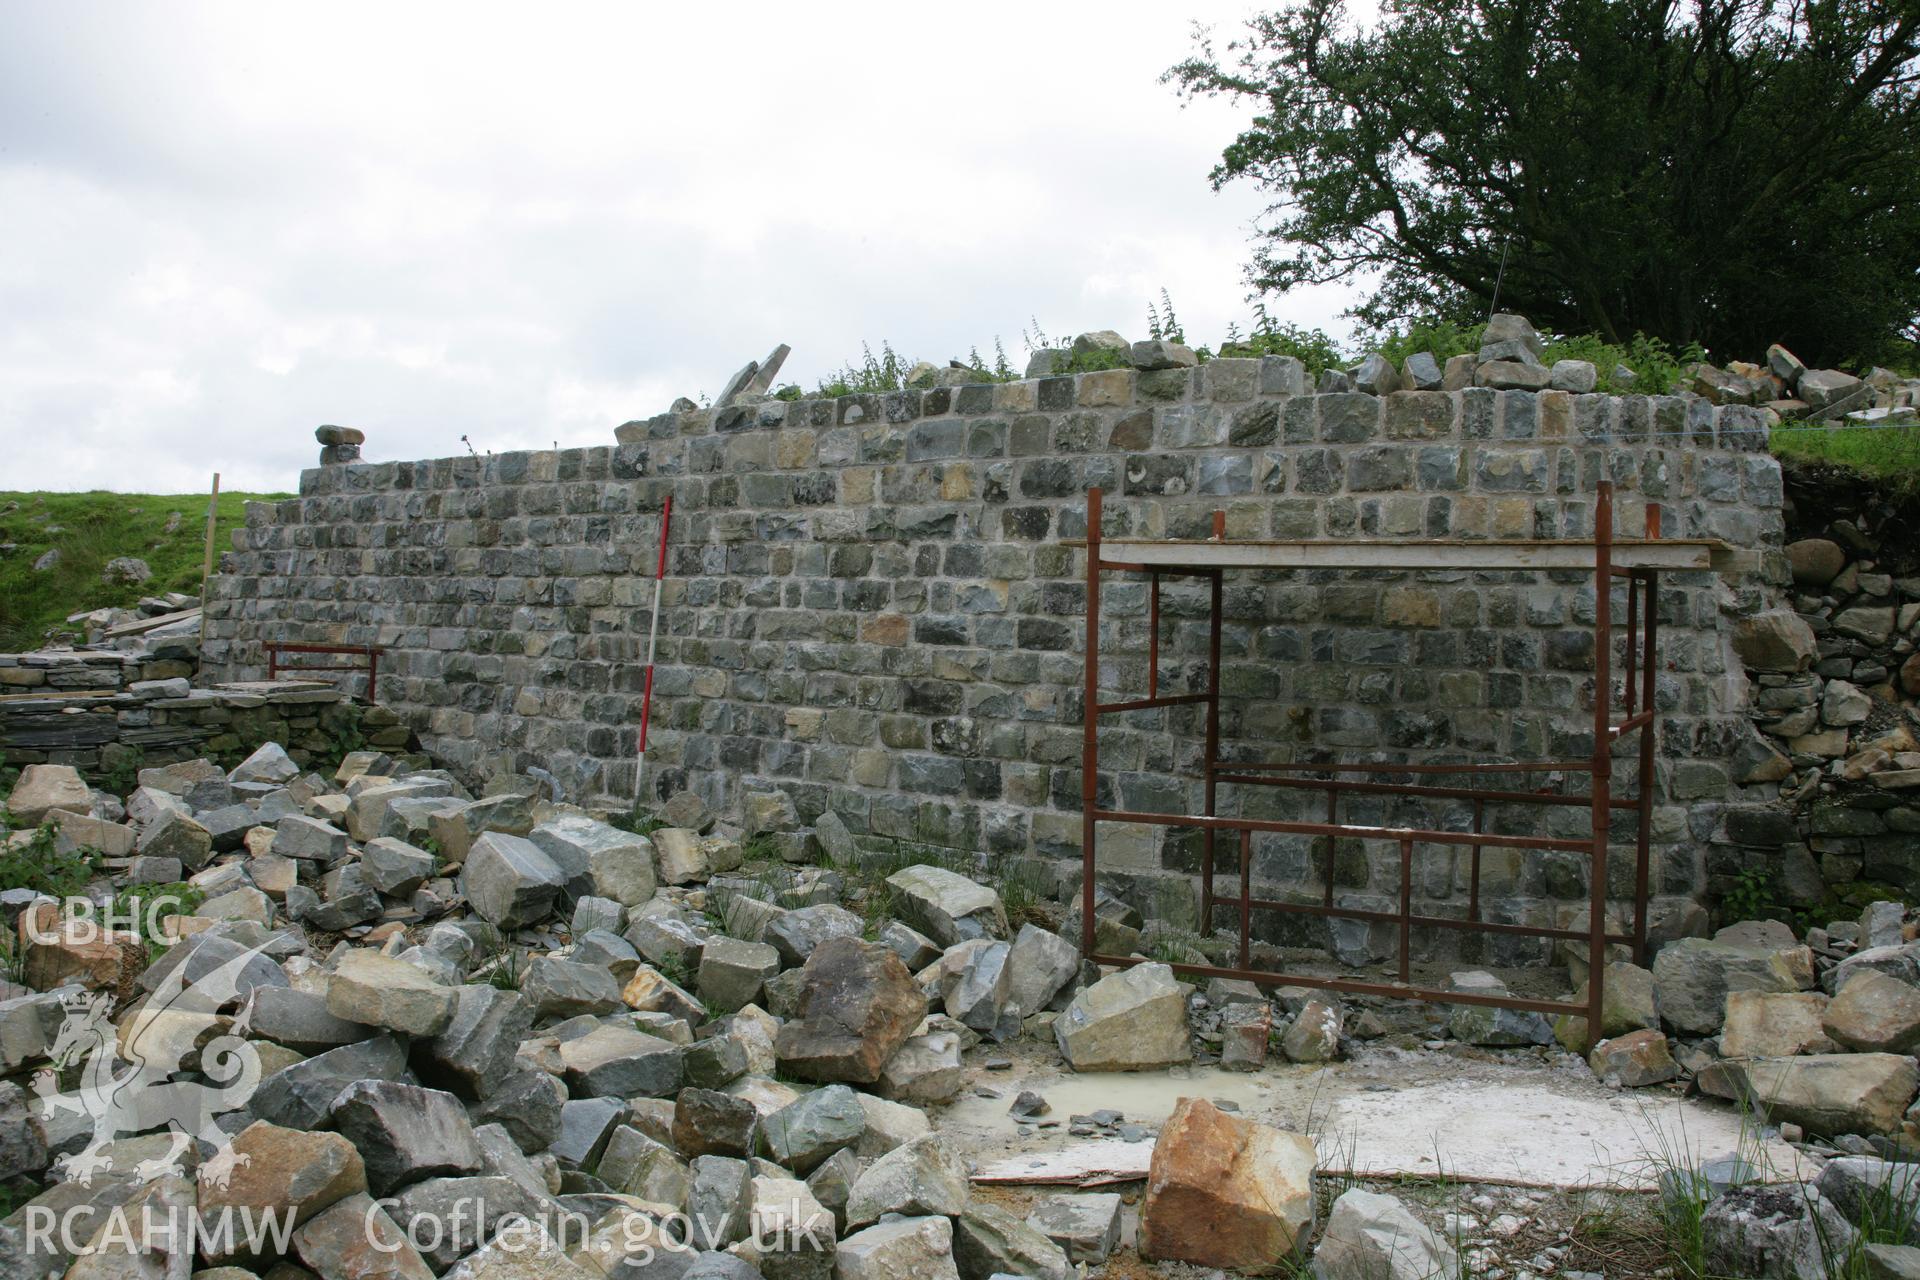 View of fort wall section reconstruction, in progress, to north-east of motte